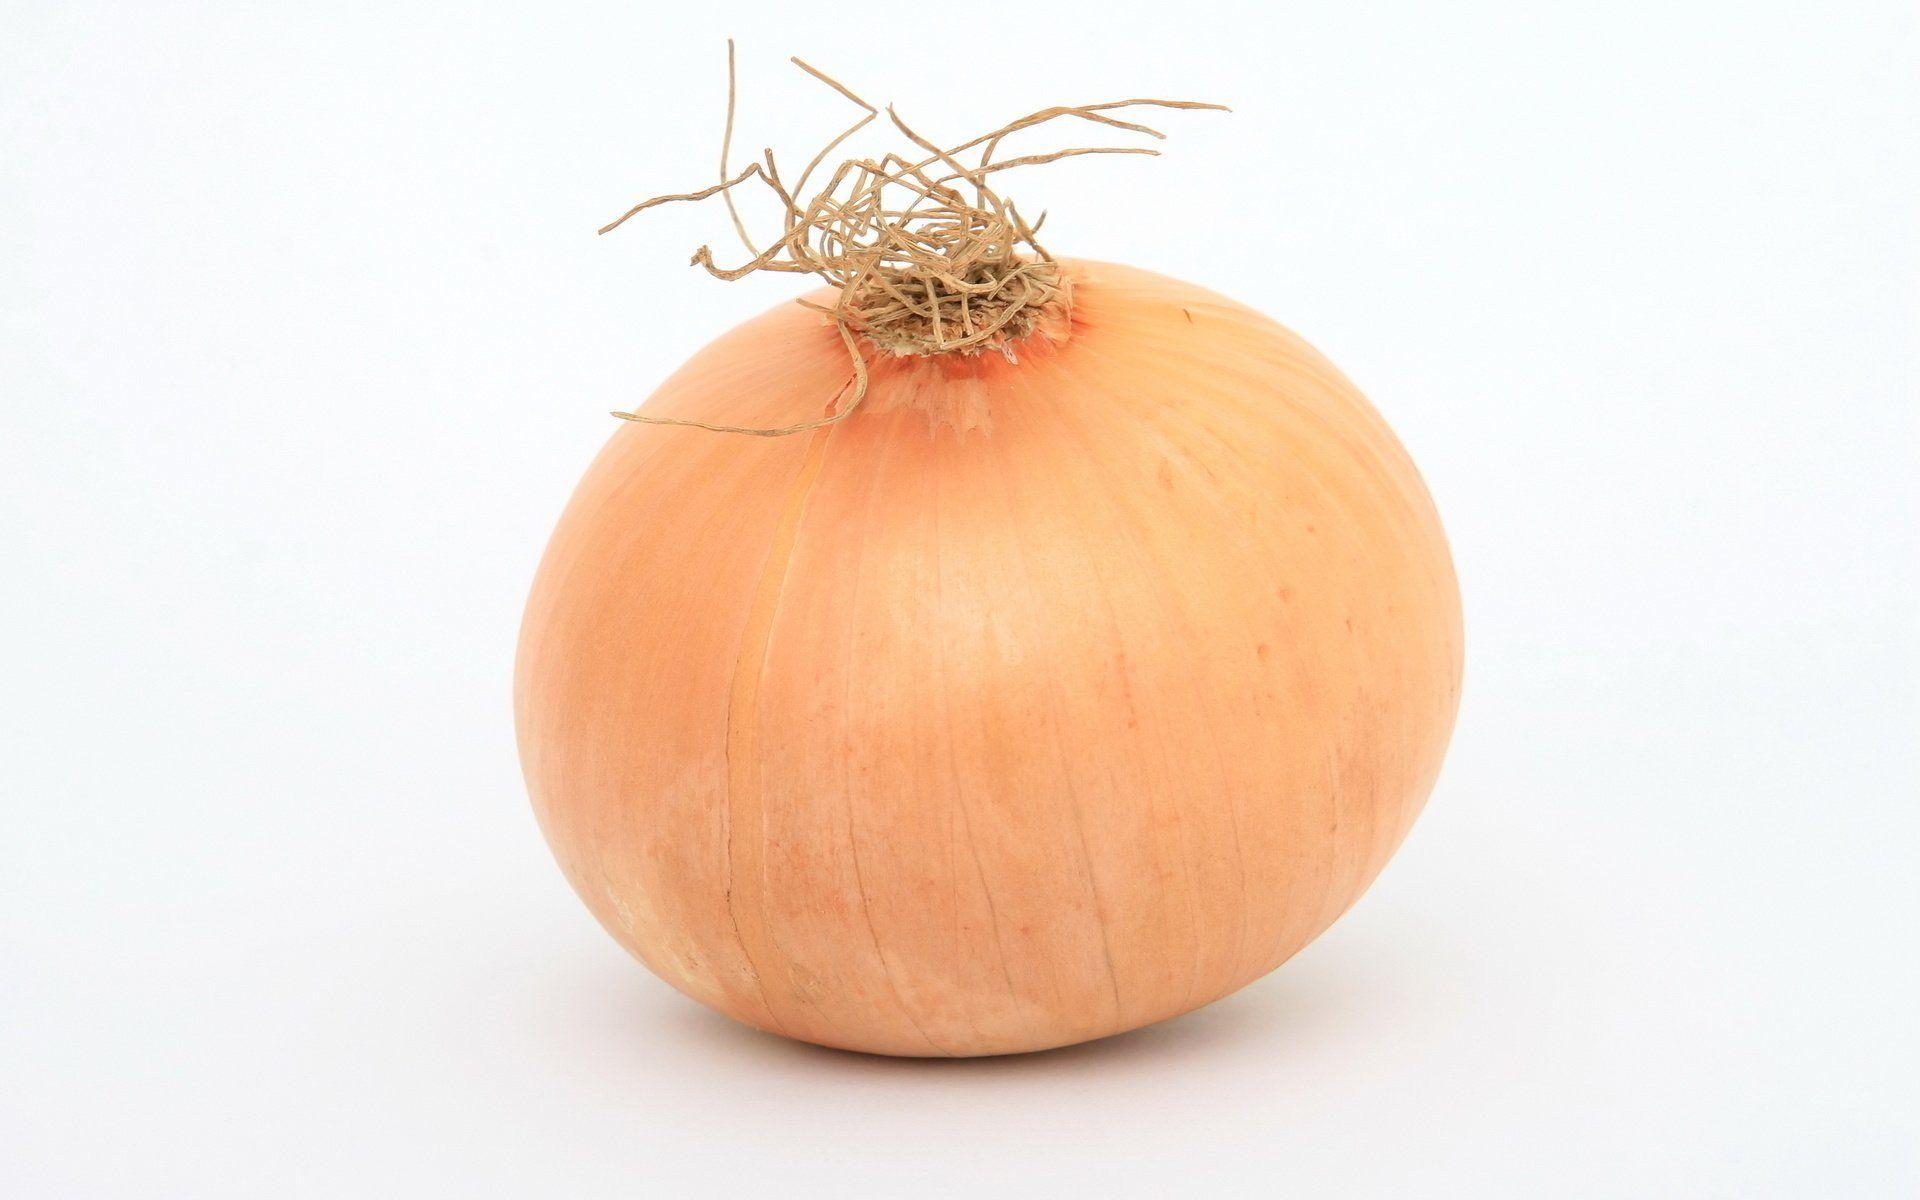 Onion HD Wallpaper and Background Image